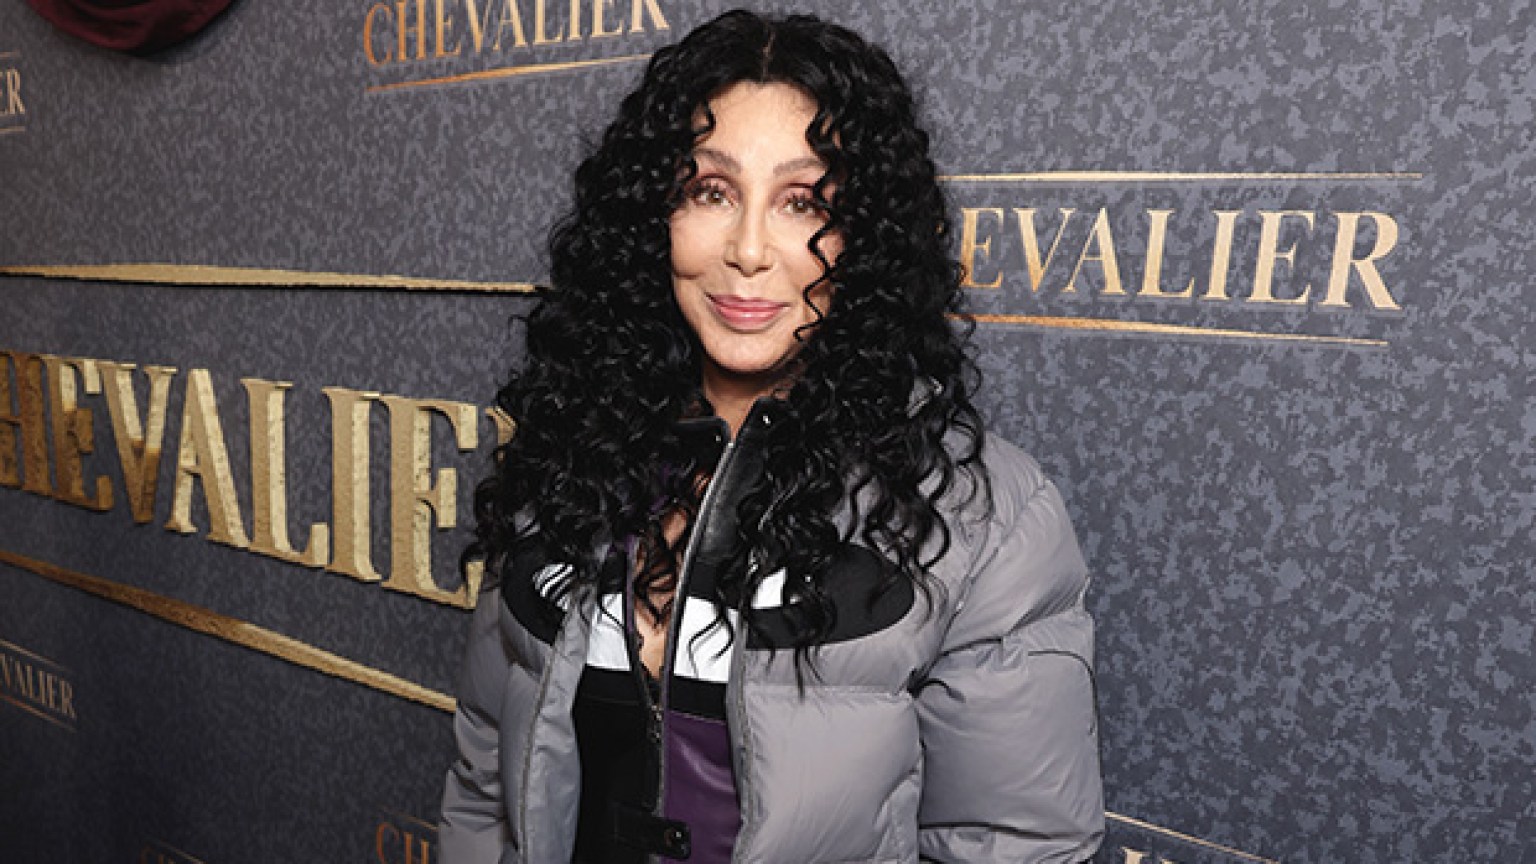 Cher’s Christmas Album Everything To Know About ‘Cher Christmas